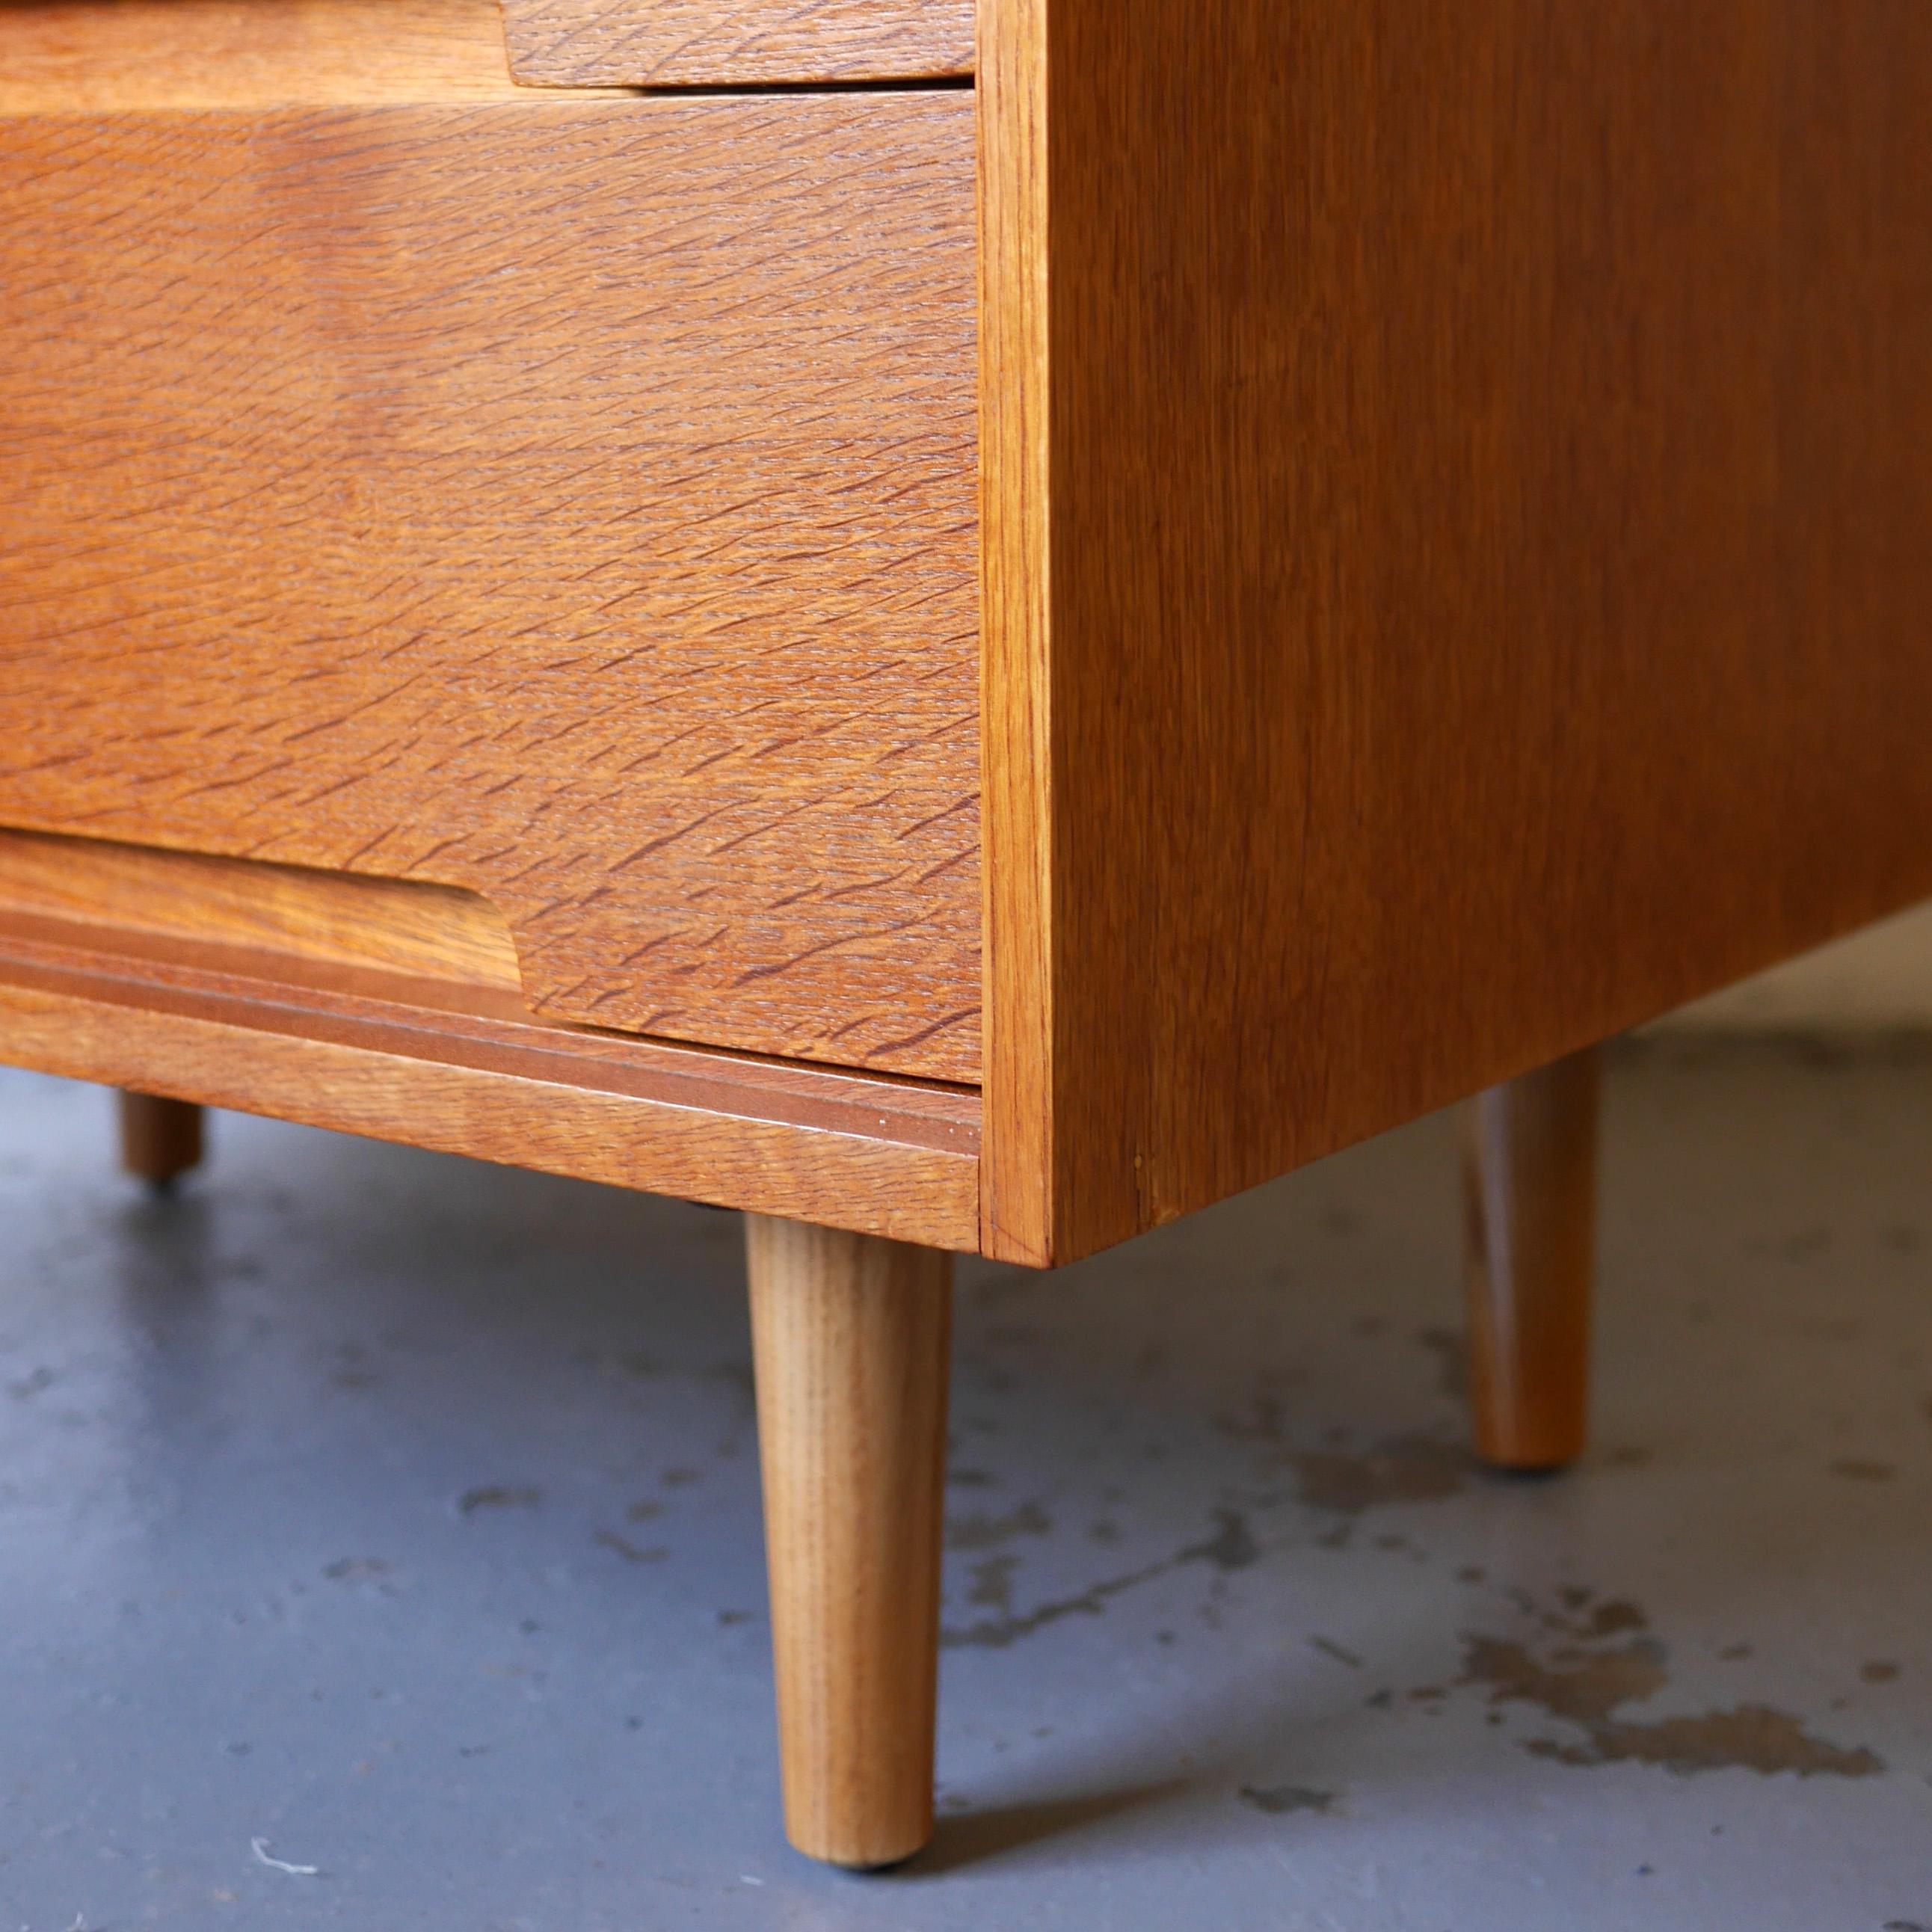 British Stag 'C' Range Chest of Four Drawers in Oak by John and Sylvia Reid, circa 1954